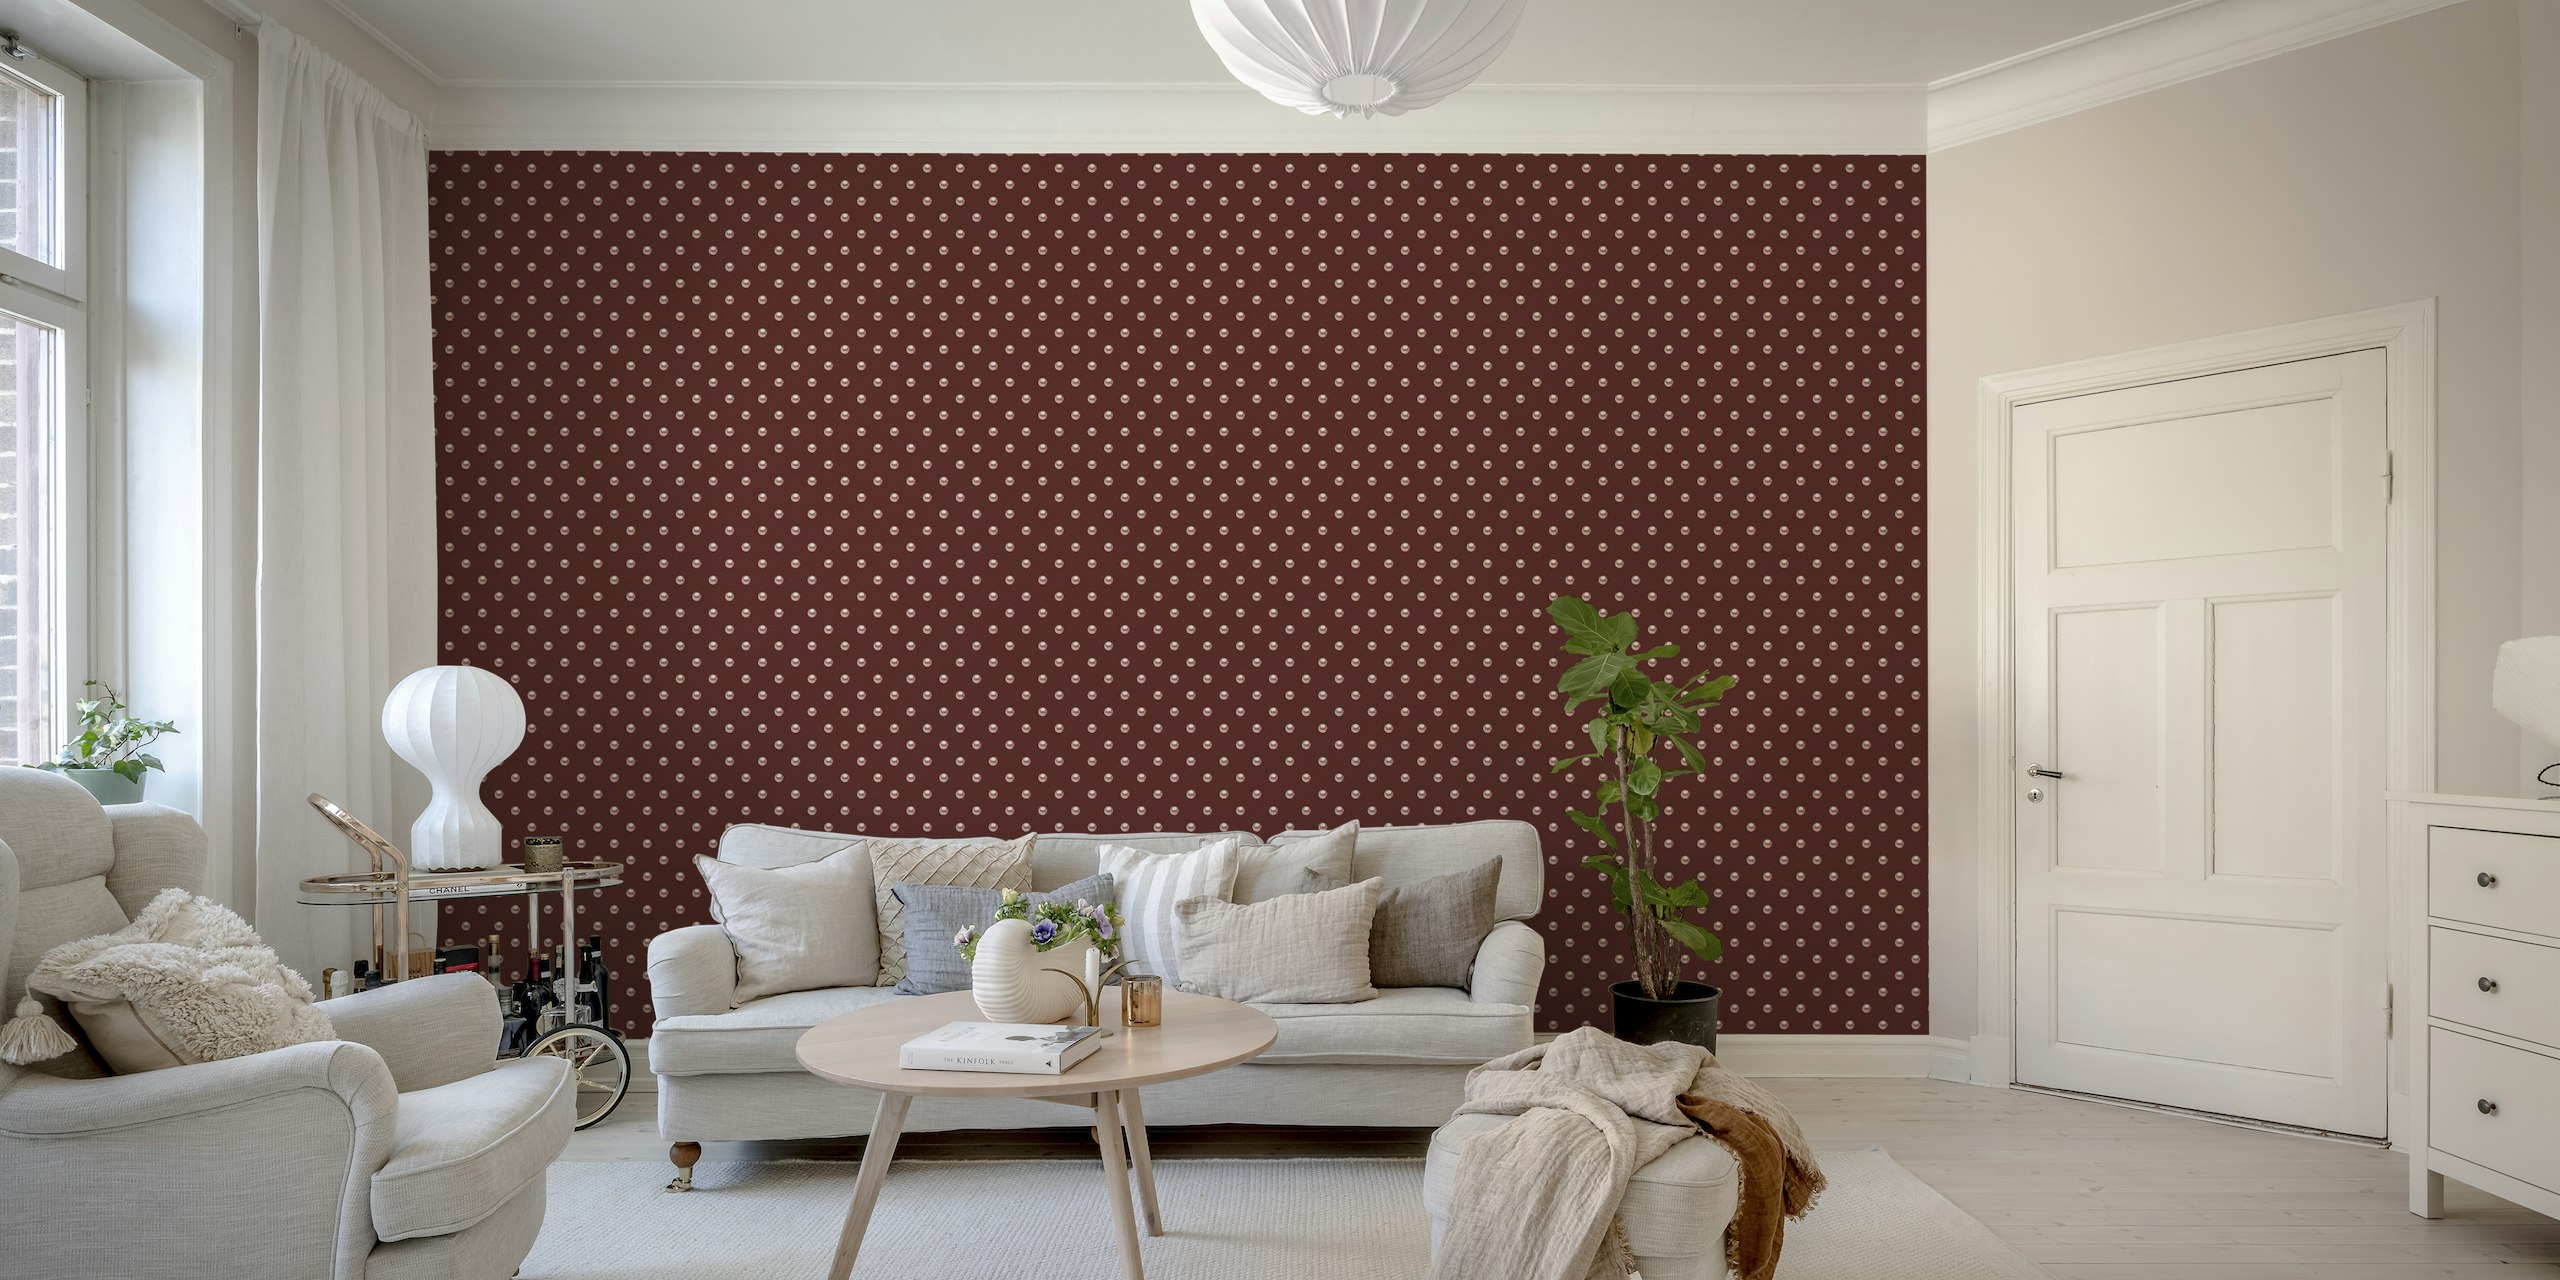 Maroon wall mural with pearl polka dot pattern from Happywall.